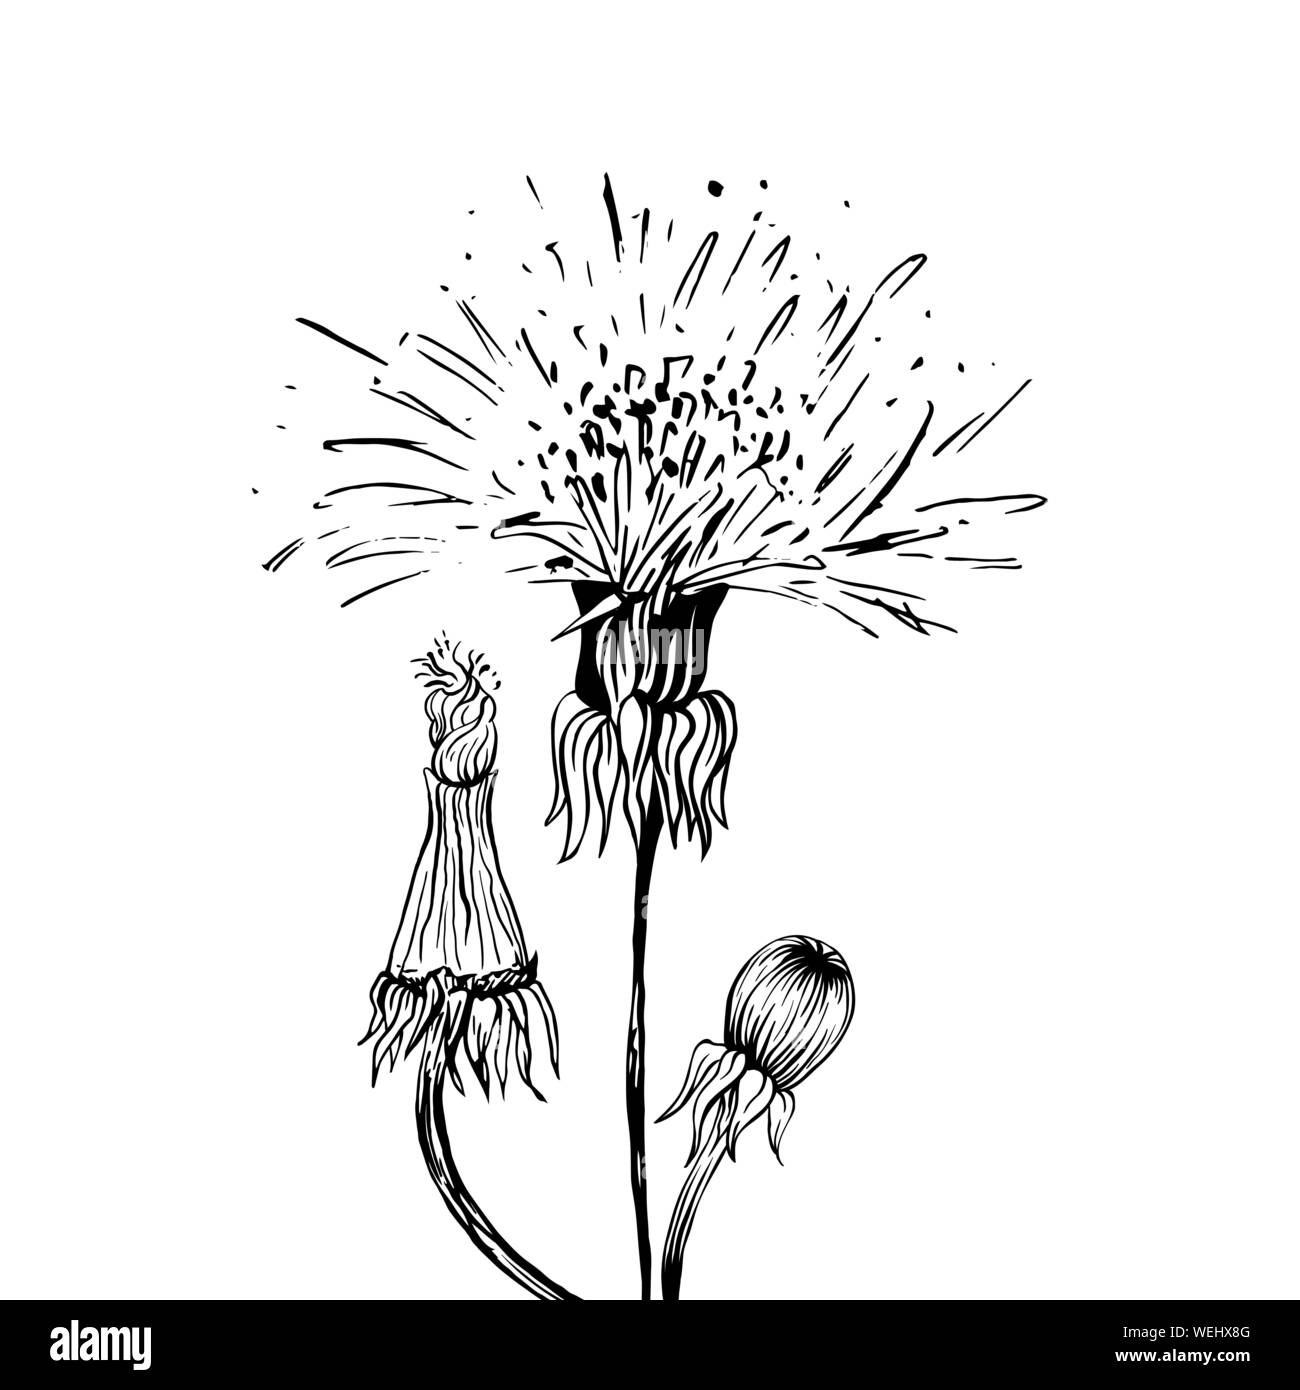 Black And White Dandelion Sketch Notebook by Magictrees & Bumblebees